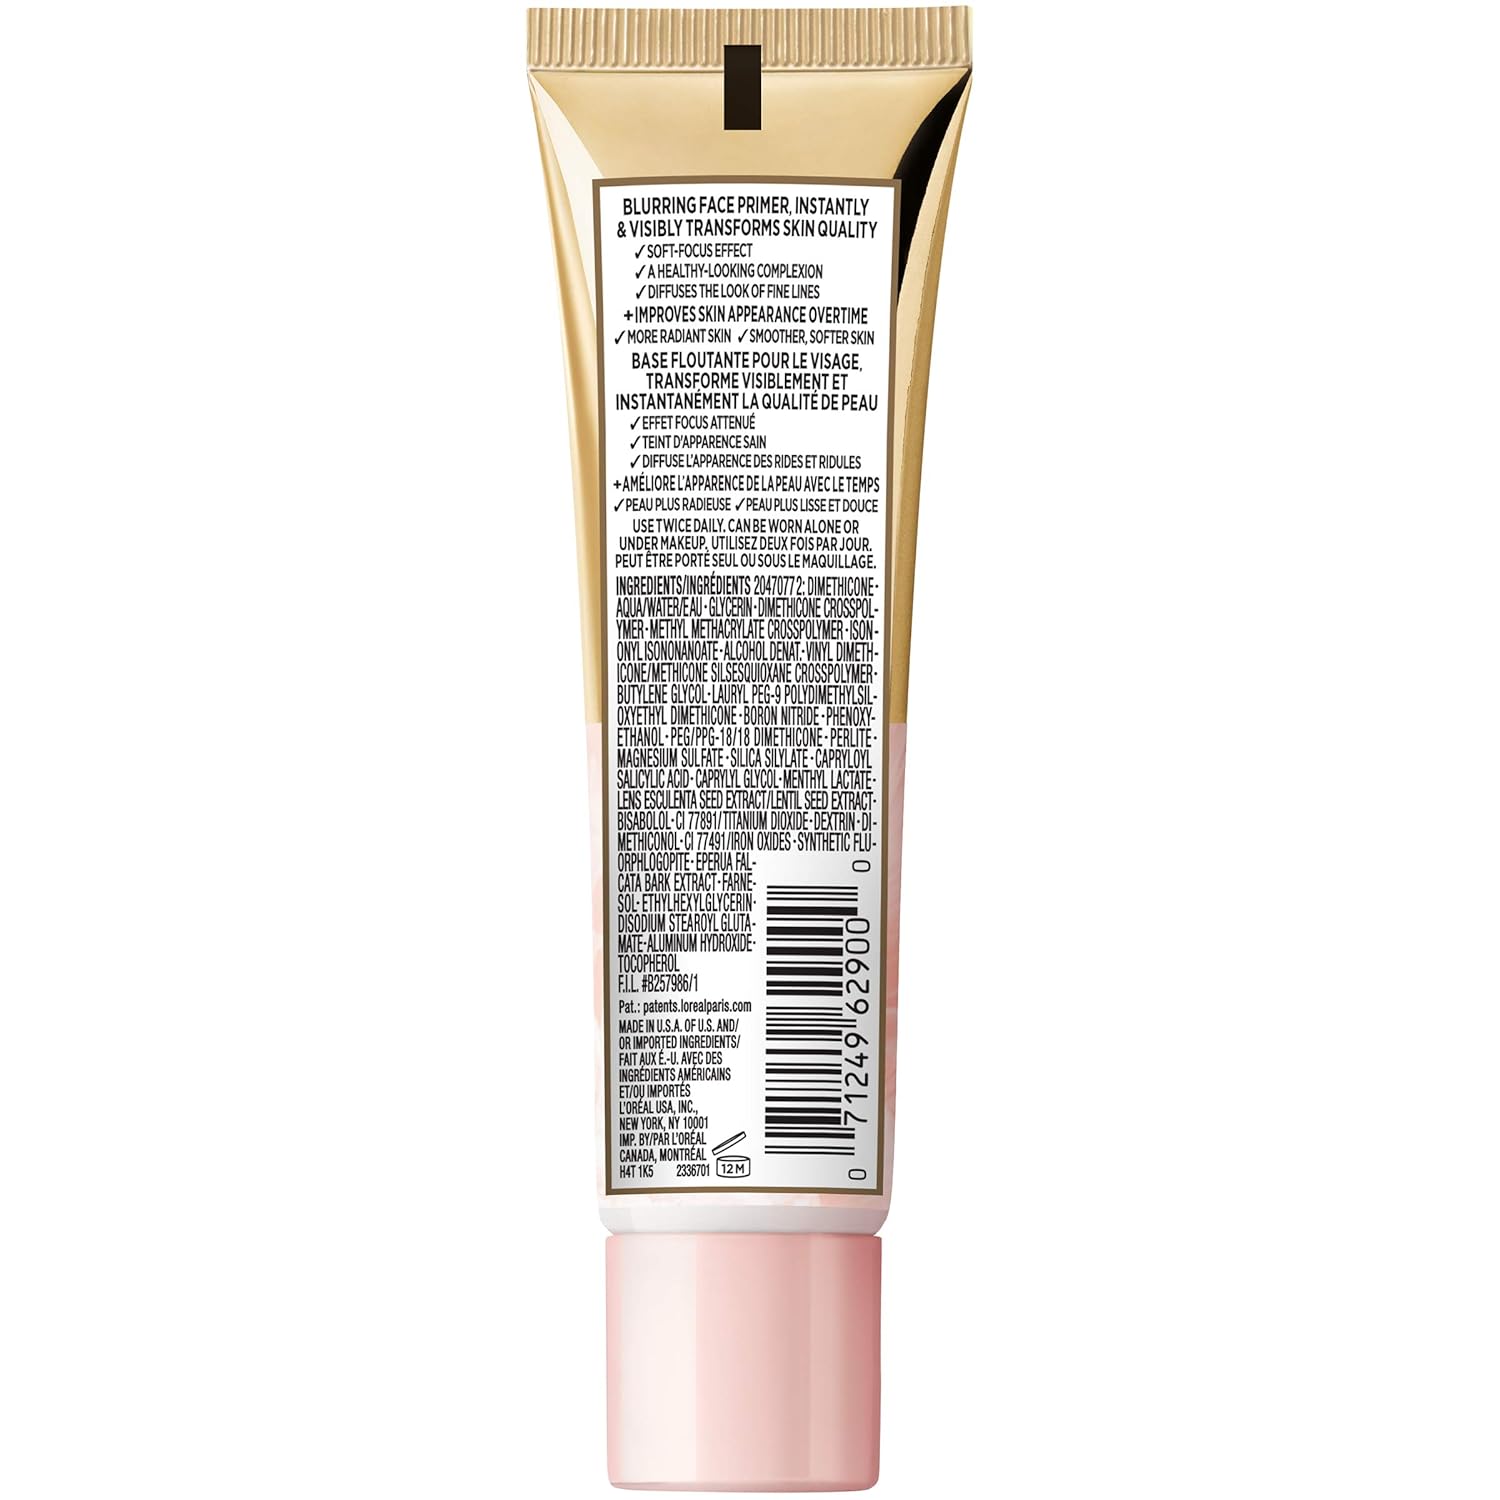  LOreal Paris Age Perfect Blurring Face Primer, Infused with Caring Serum, 1 fl. oz.